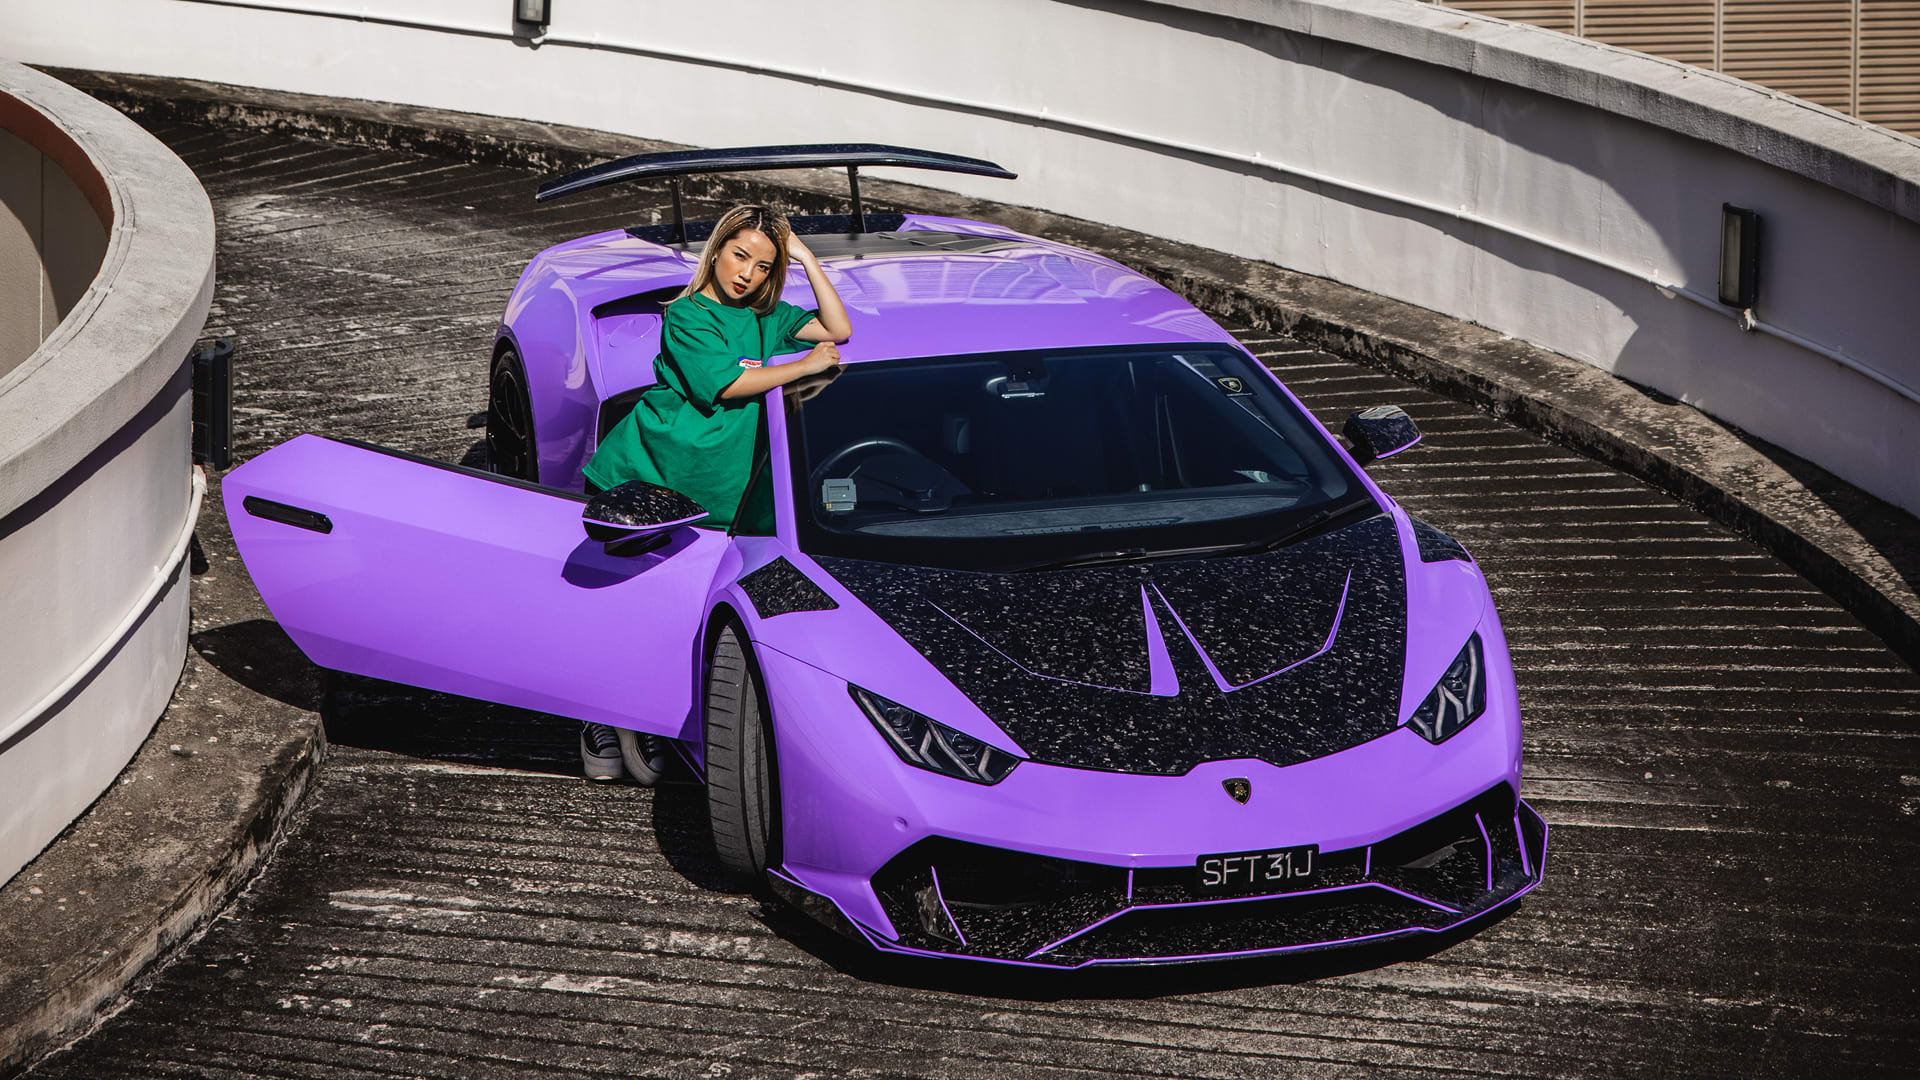 Influencer Naomi Neo Didn’t Expect So Much Flak For Sharing About Her $600K Lamborghini